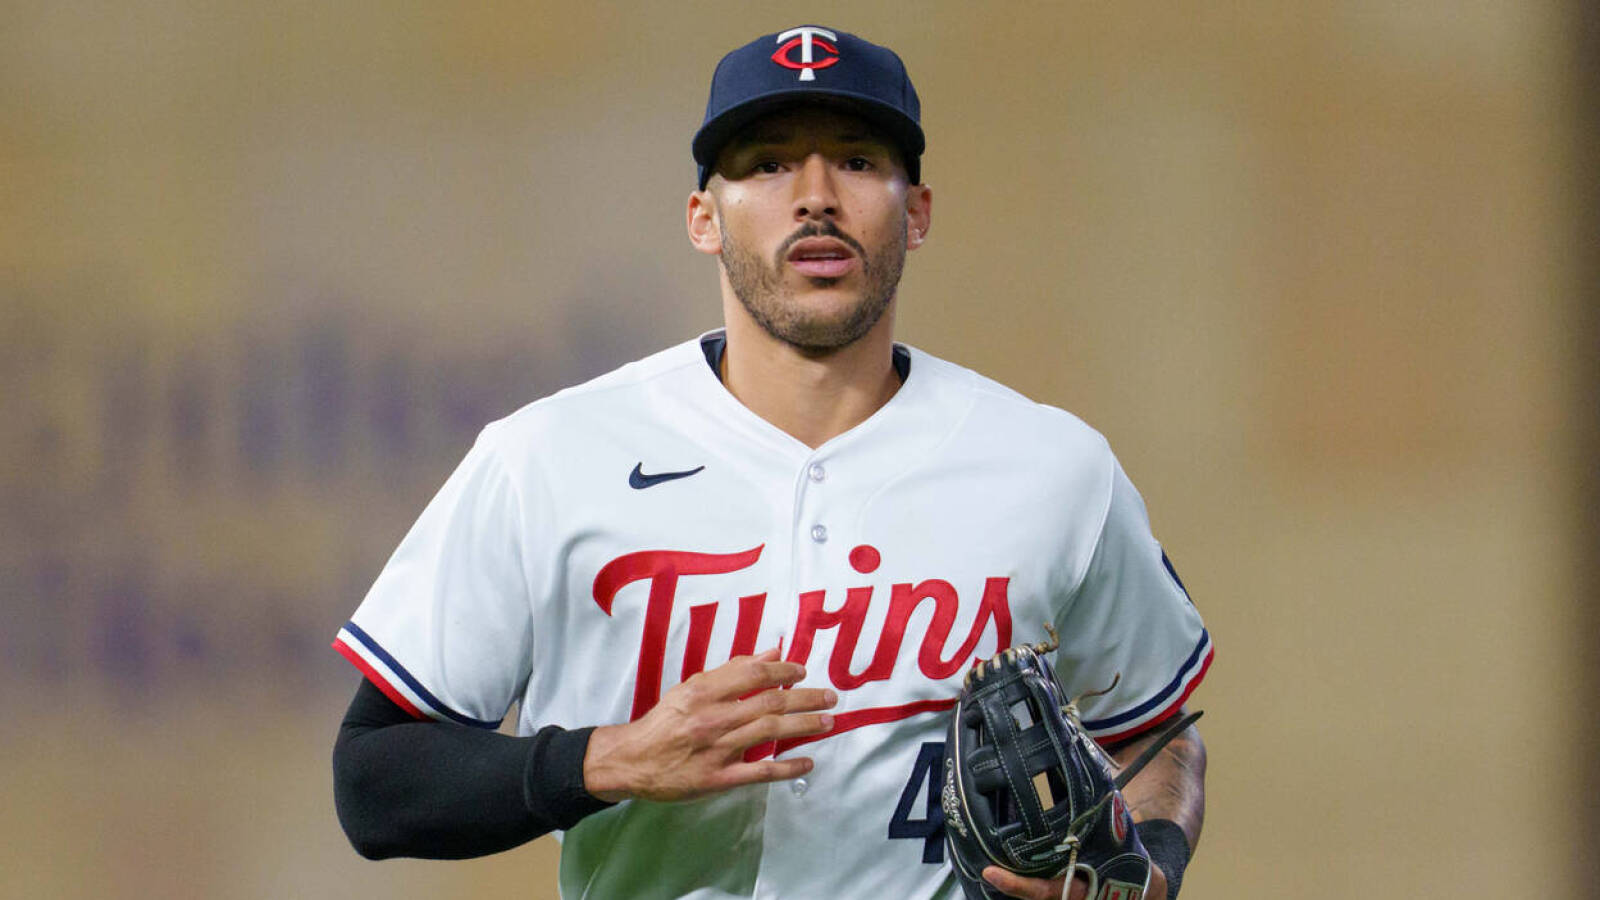 Twins star SS lands on IL amid team's push for division title